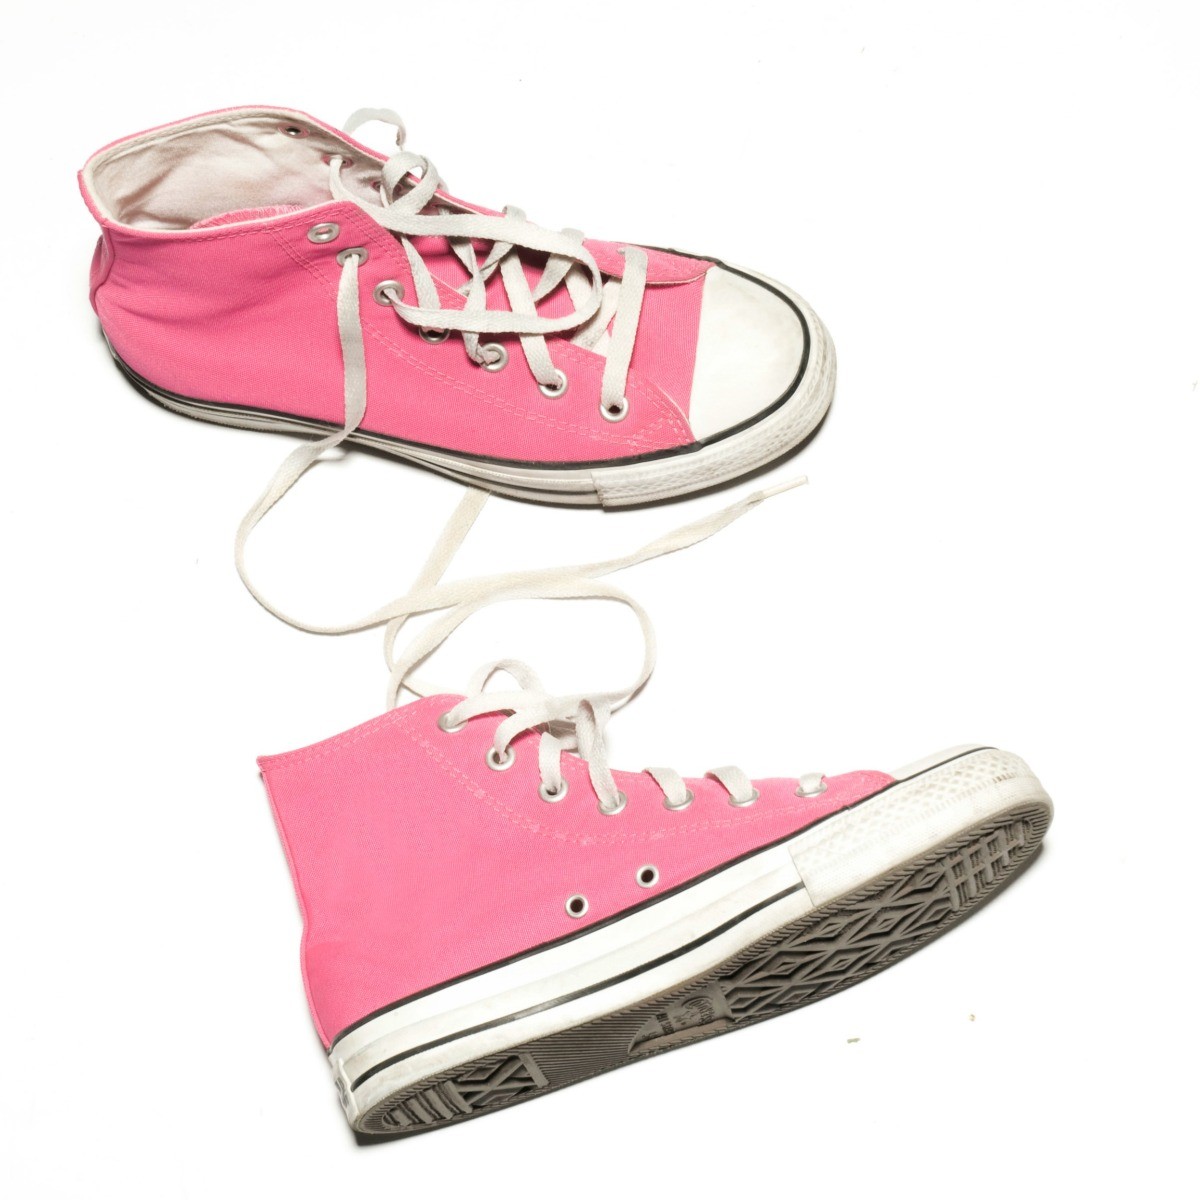 Bleaching Colored Converse Shoes? | ThriftyFun